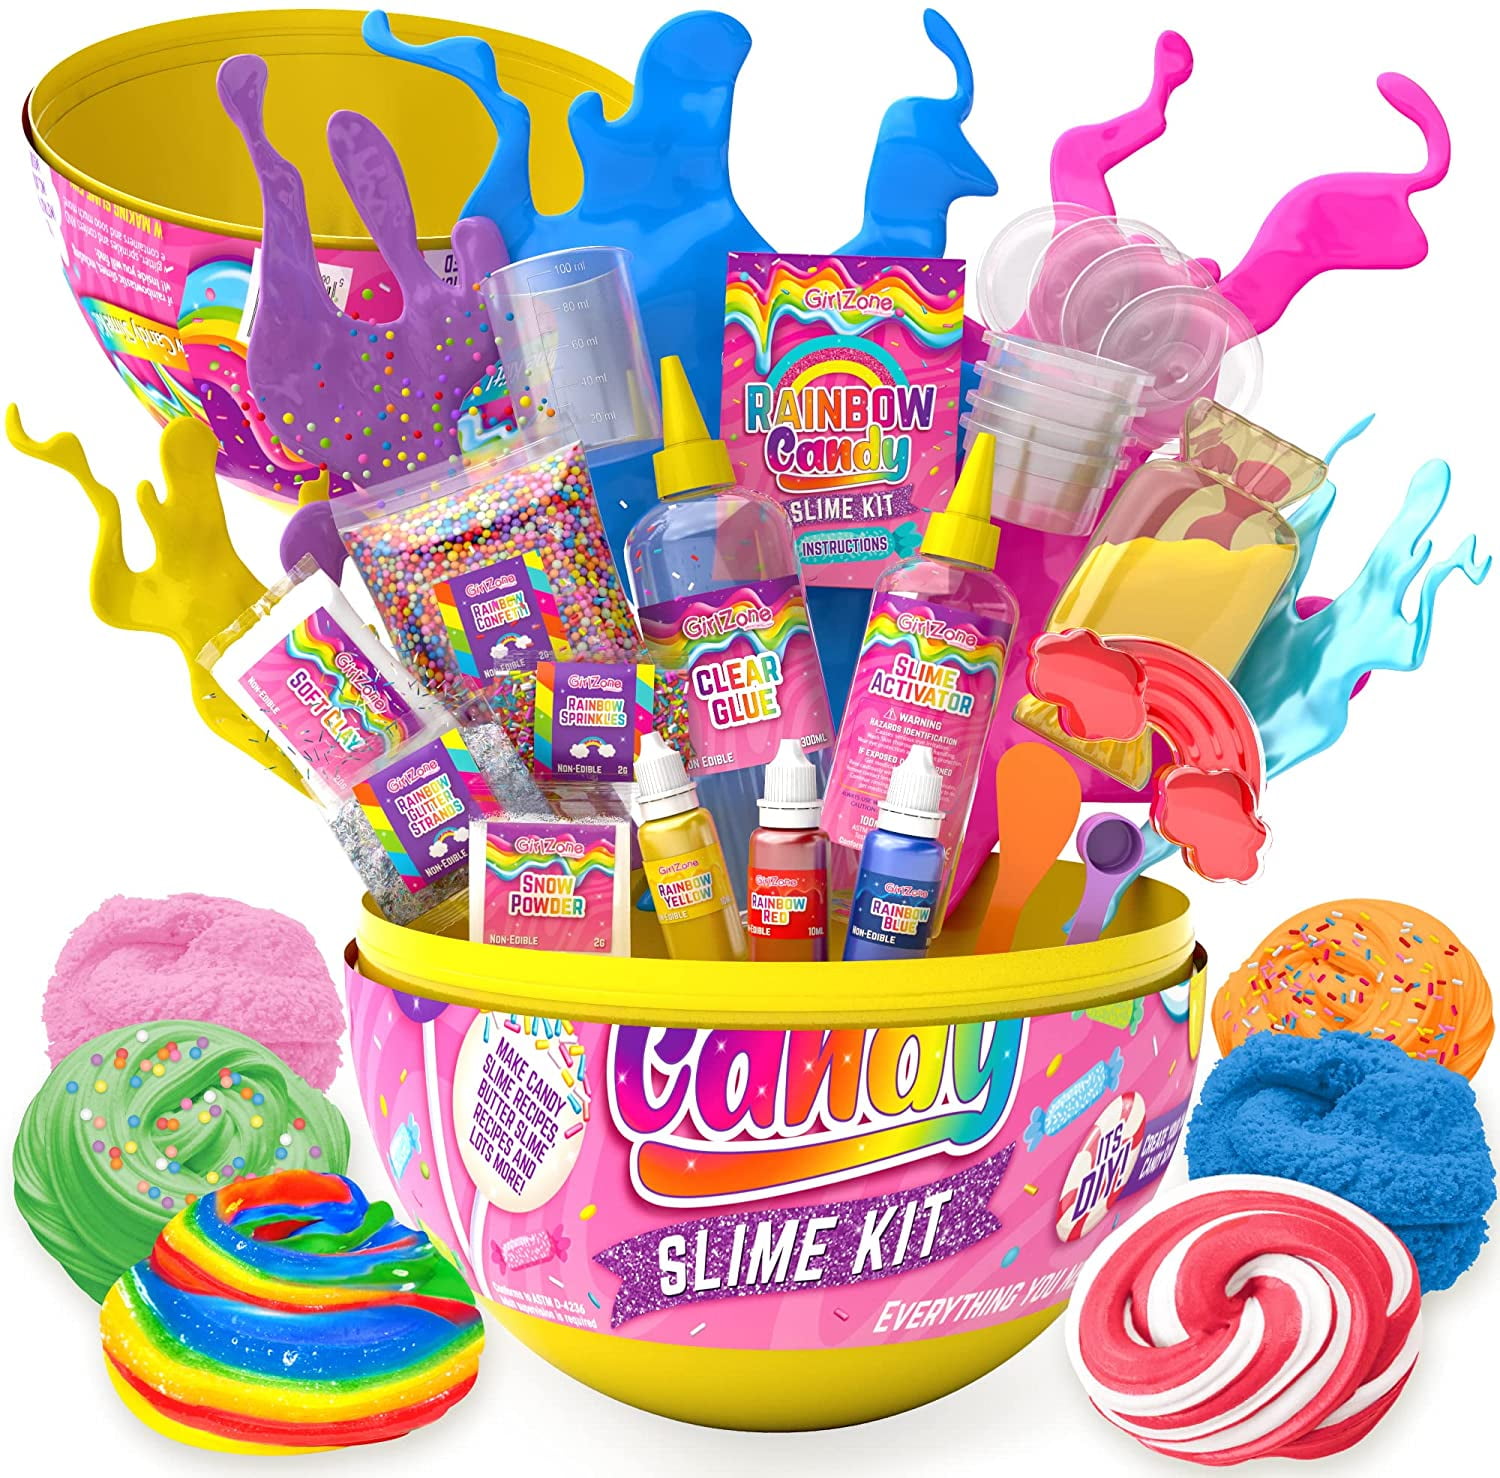 GirlZone Rainbow Candy DIY Slime Kit, Everything in One Egg to Make Rainbow  Slime, Fluffy Cloud Slime, Clear Butter Slime and More, Great Gift Idea